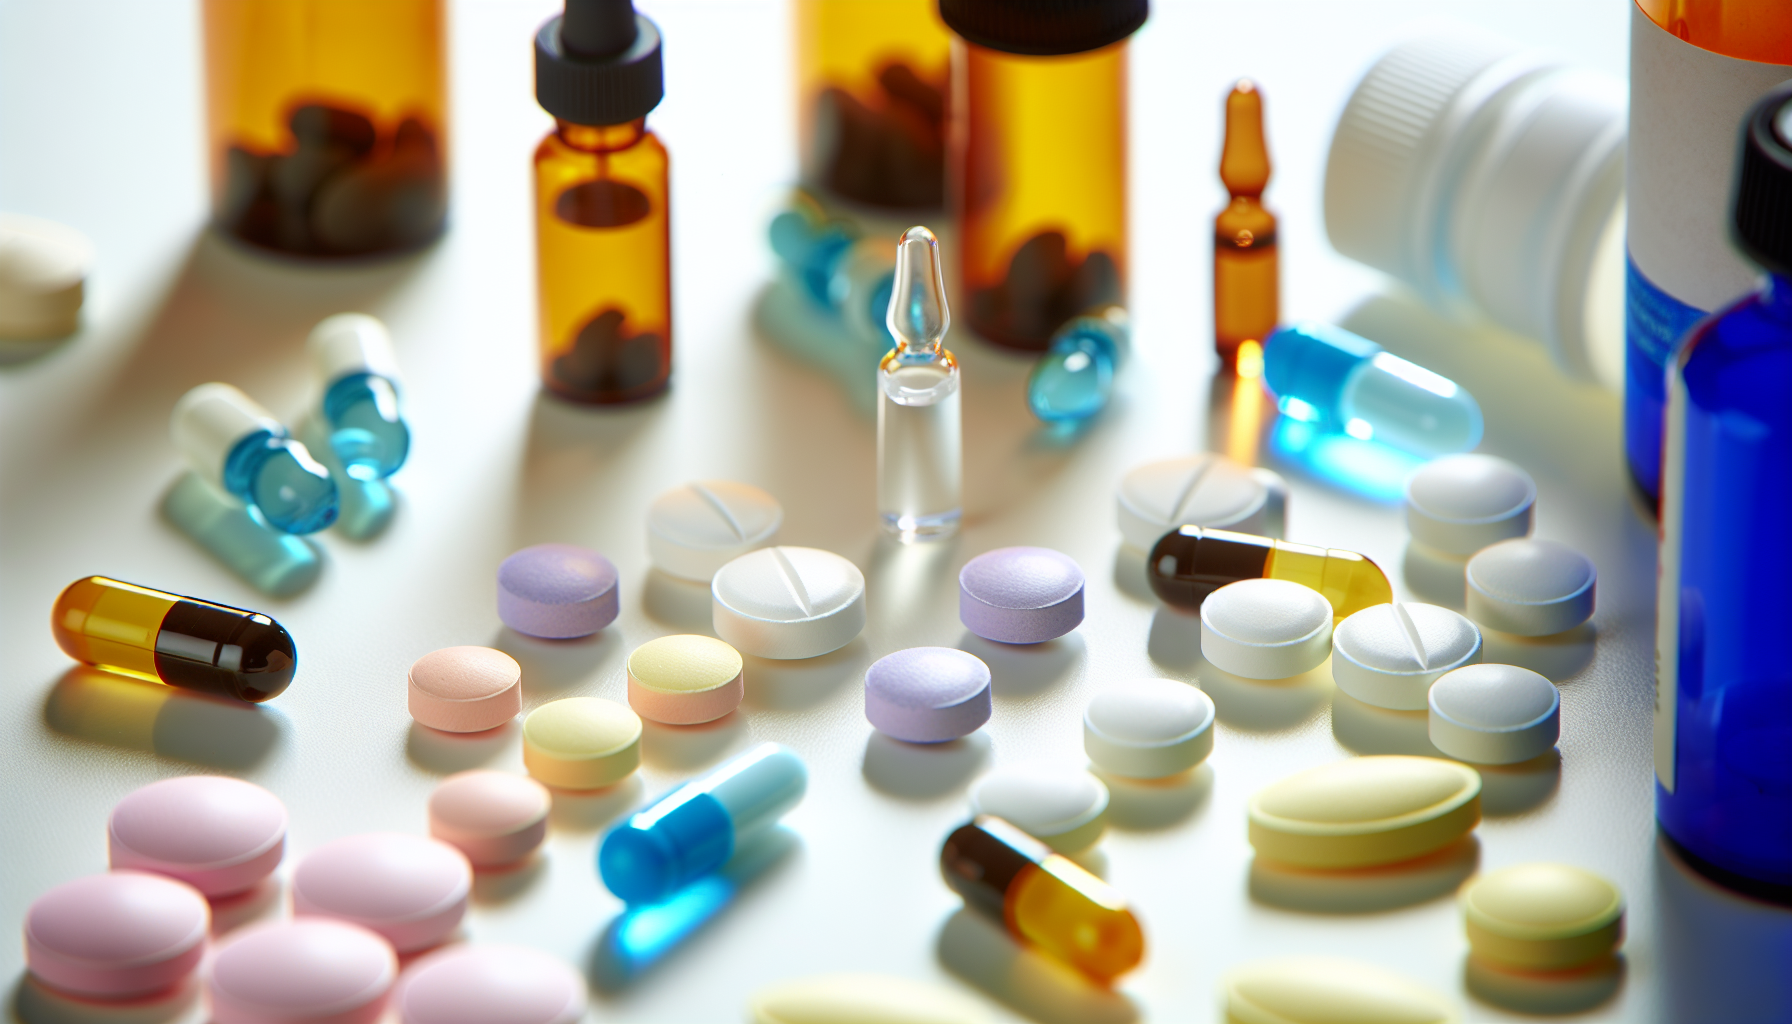 Various types of prescription drugs including opioids and benzodiazepines